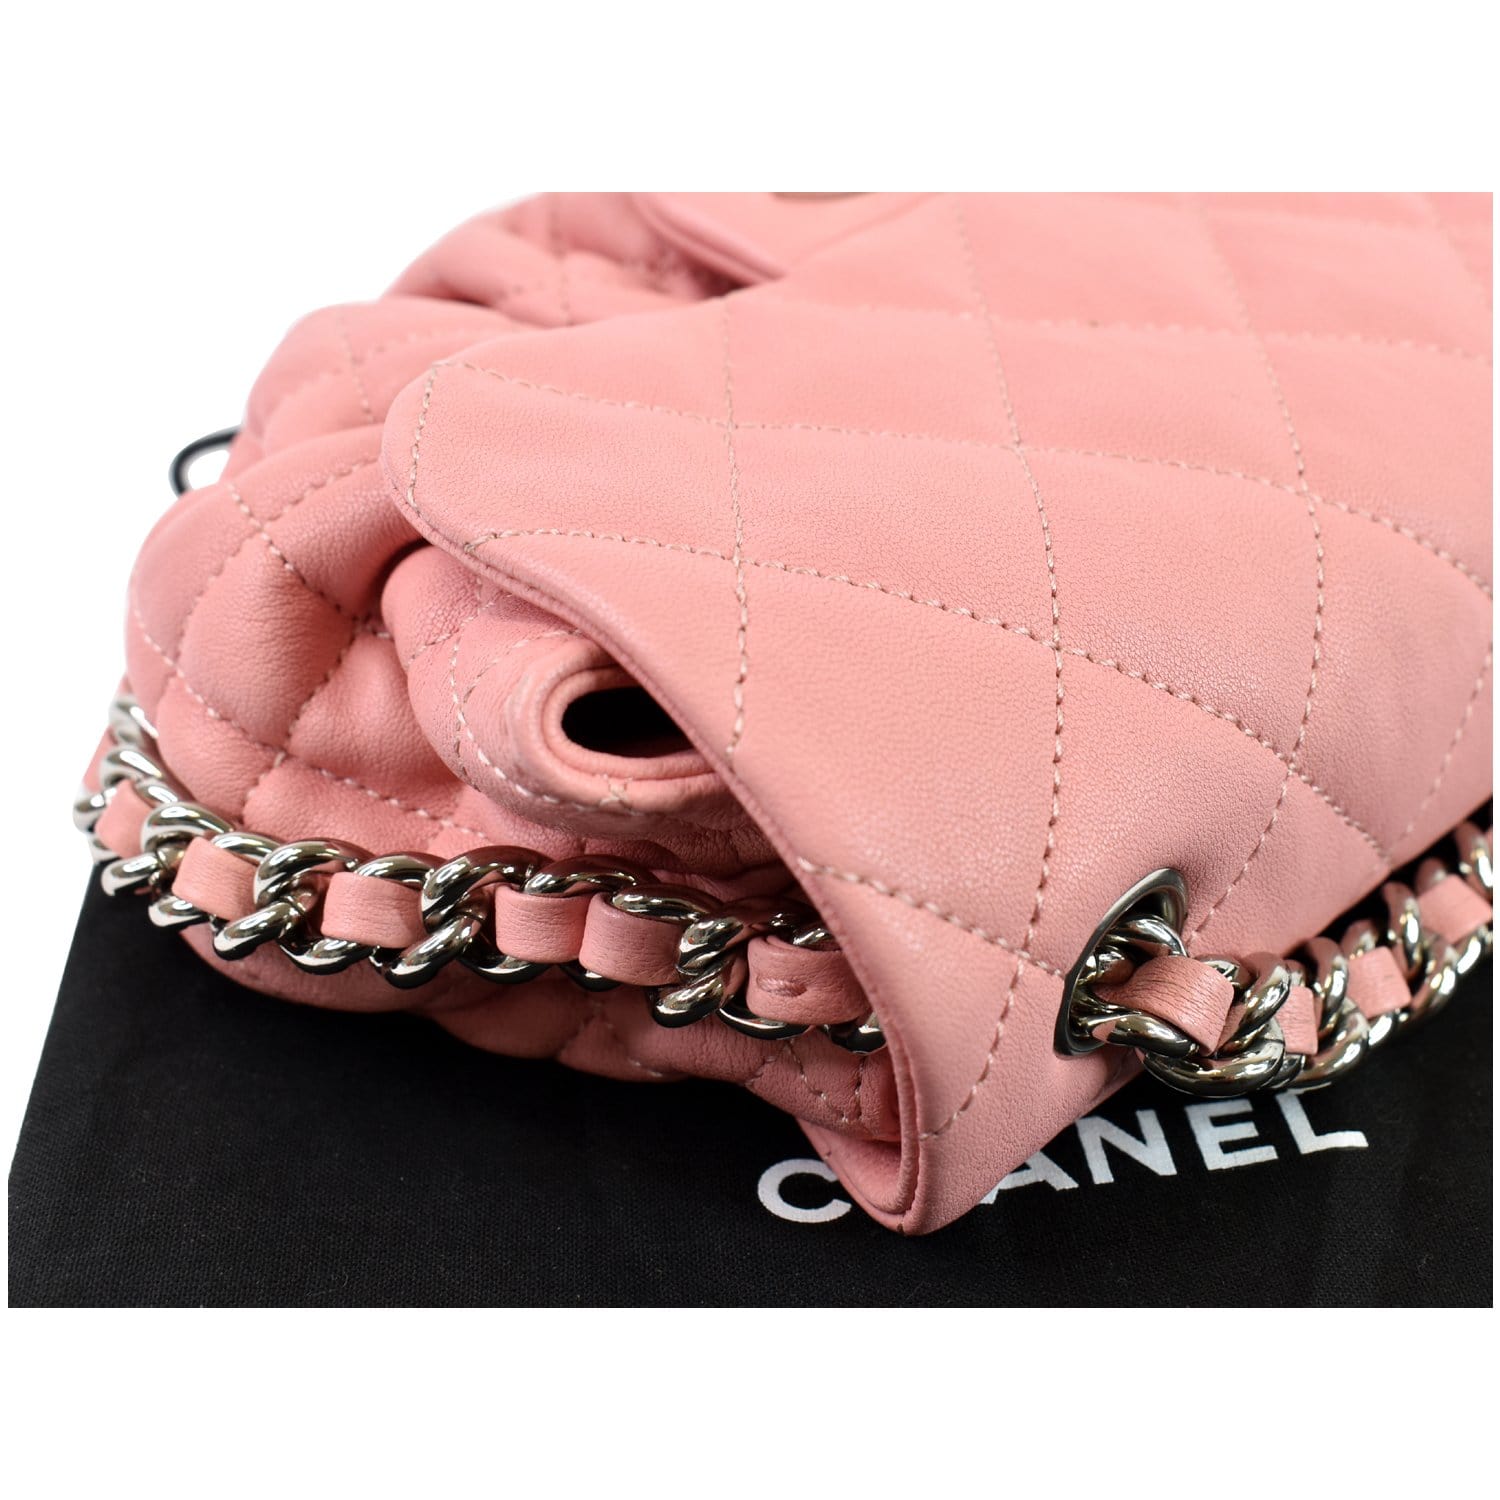 chanel phone holder on chain